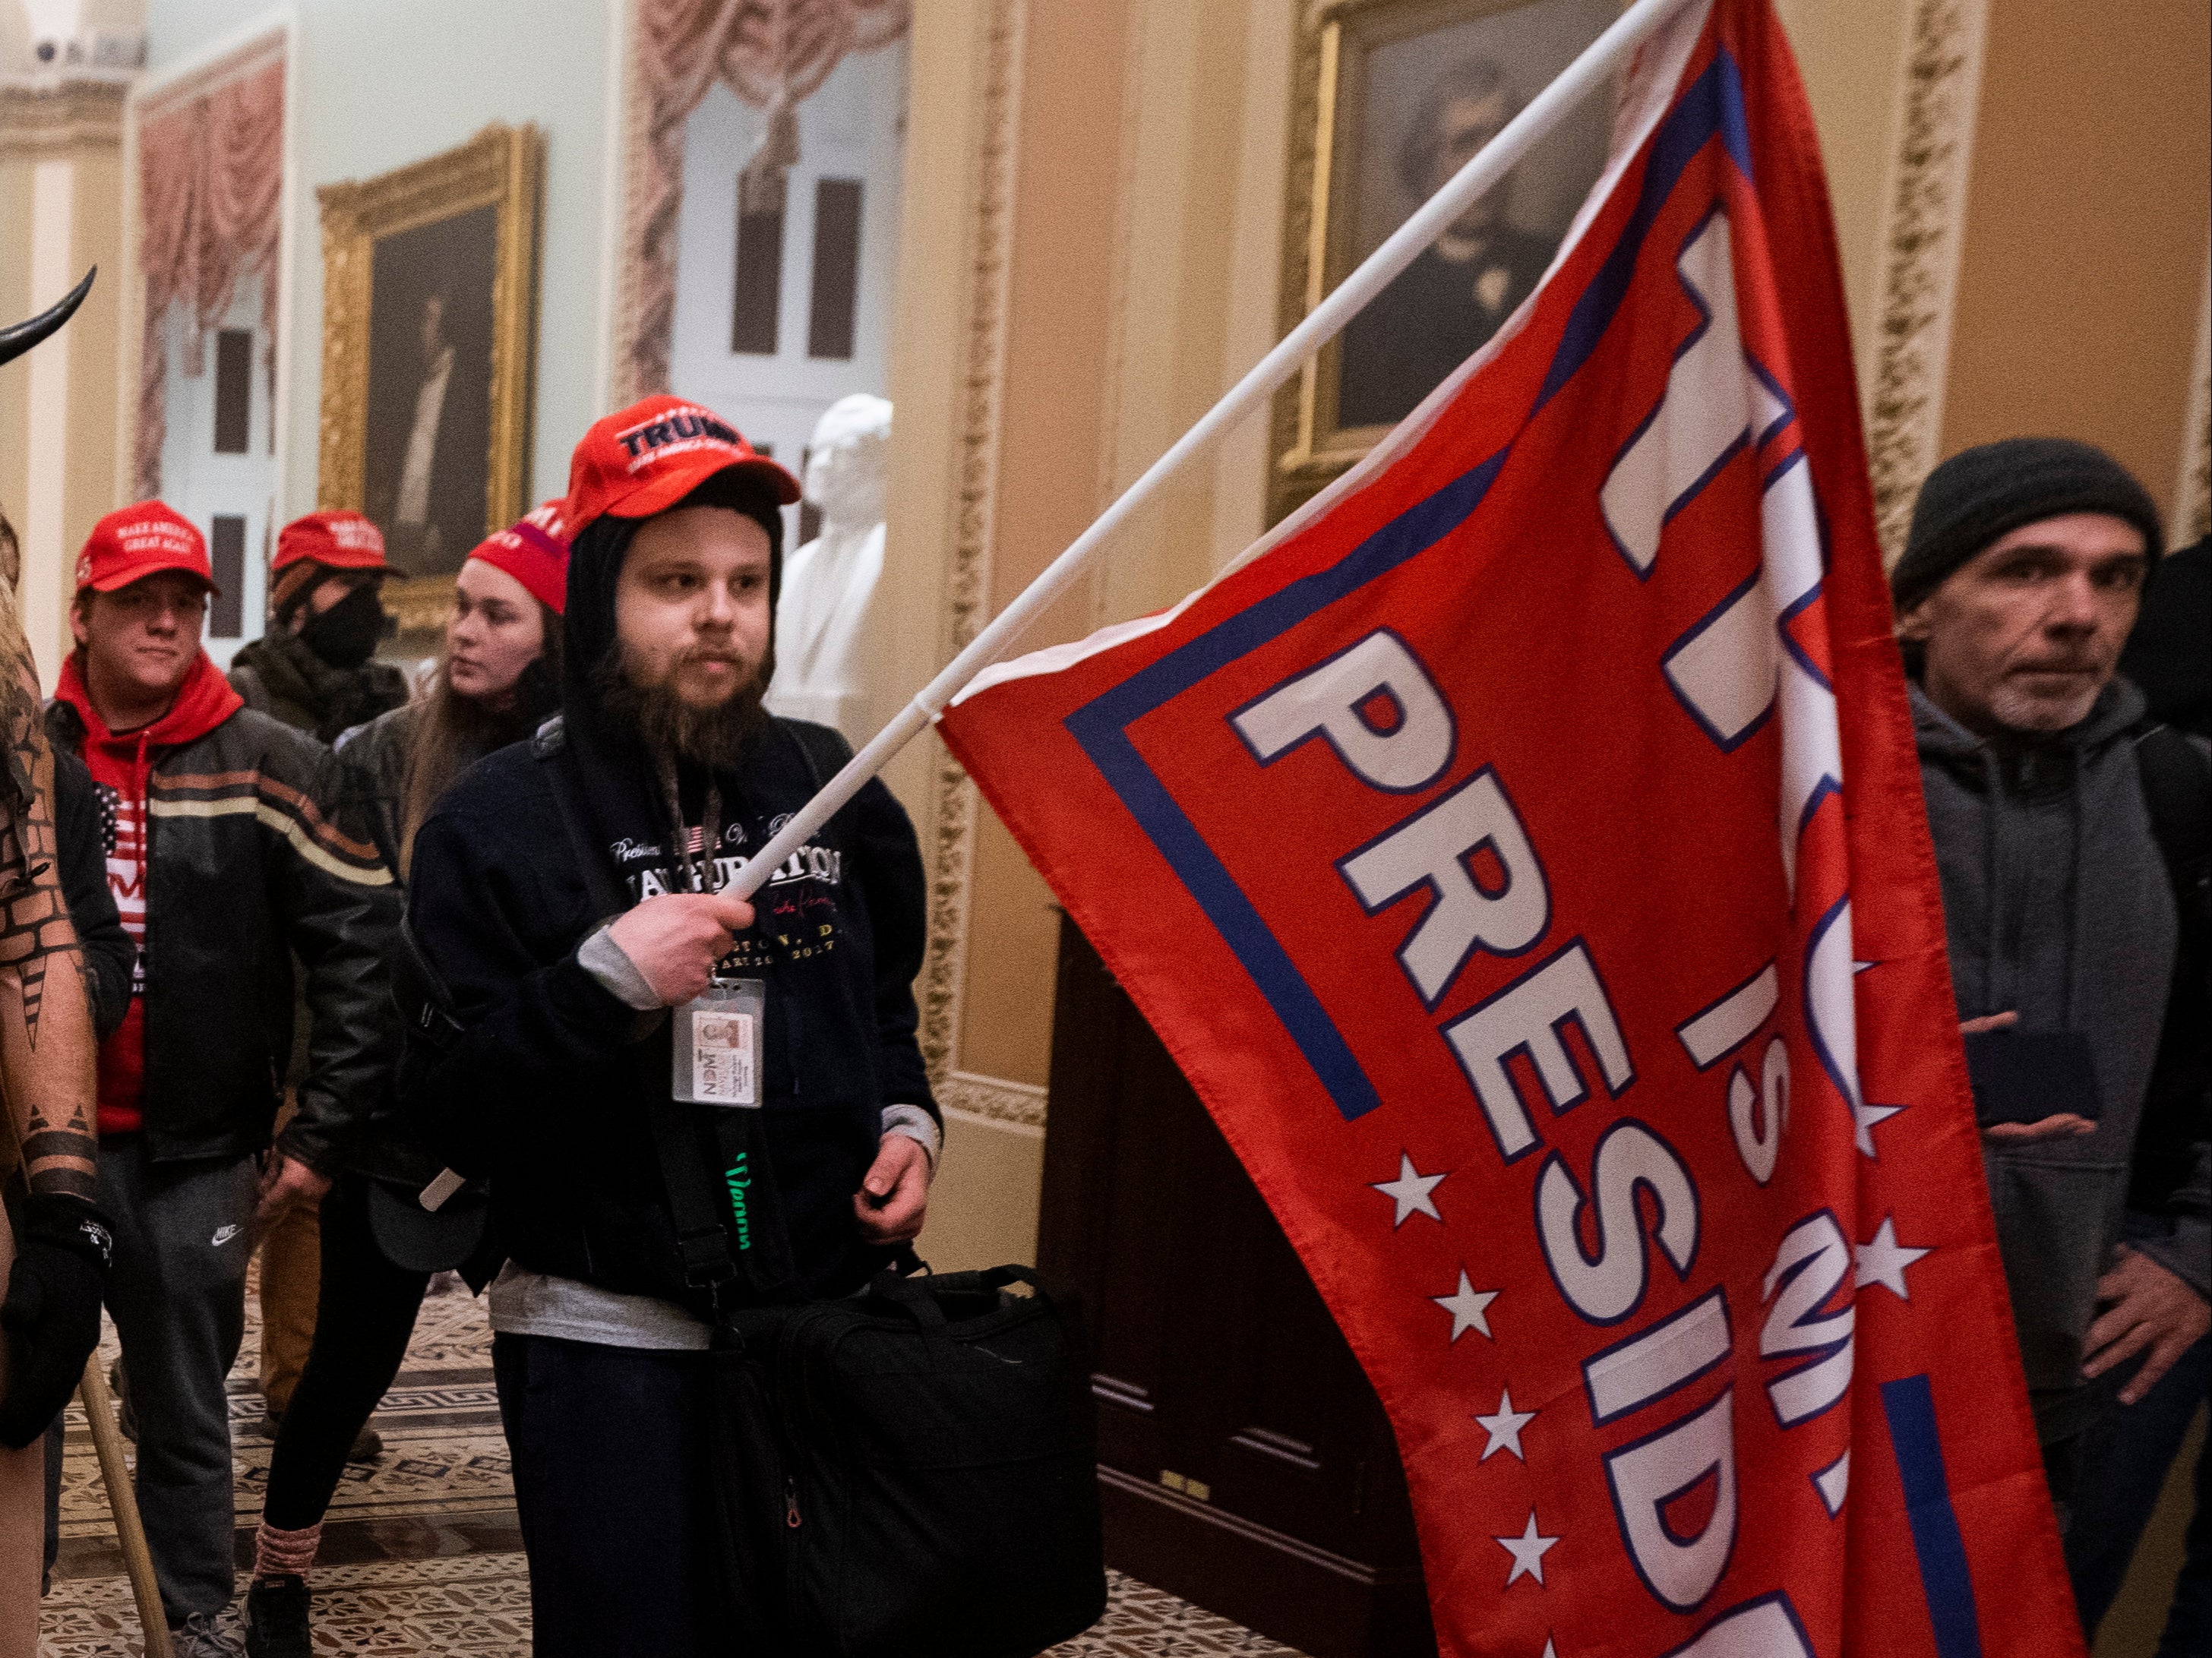 Supporters of US President Donald J. Trump stand by the door to the Senate chambers after they breached the US Capitol security in Washington, DC, USA, 06 January 2021. Protesters stormed the US Capitol where the Electoral College vote certification for President-elect Joe Biden took place. EPA/JIM LO SCALZO